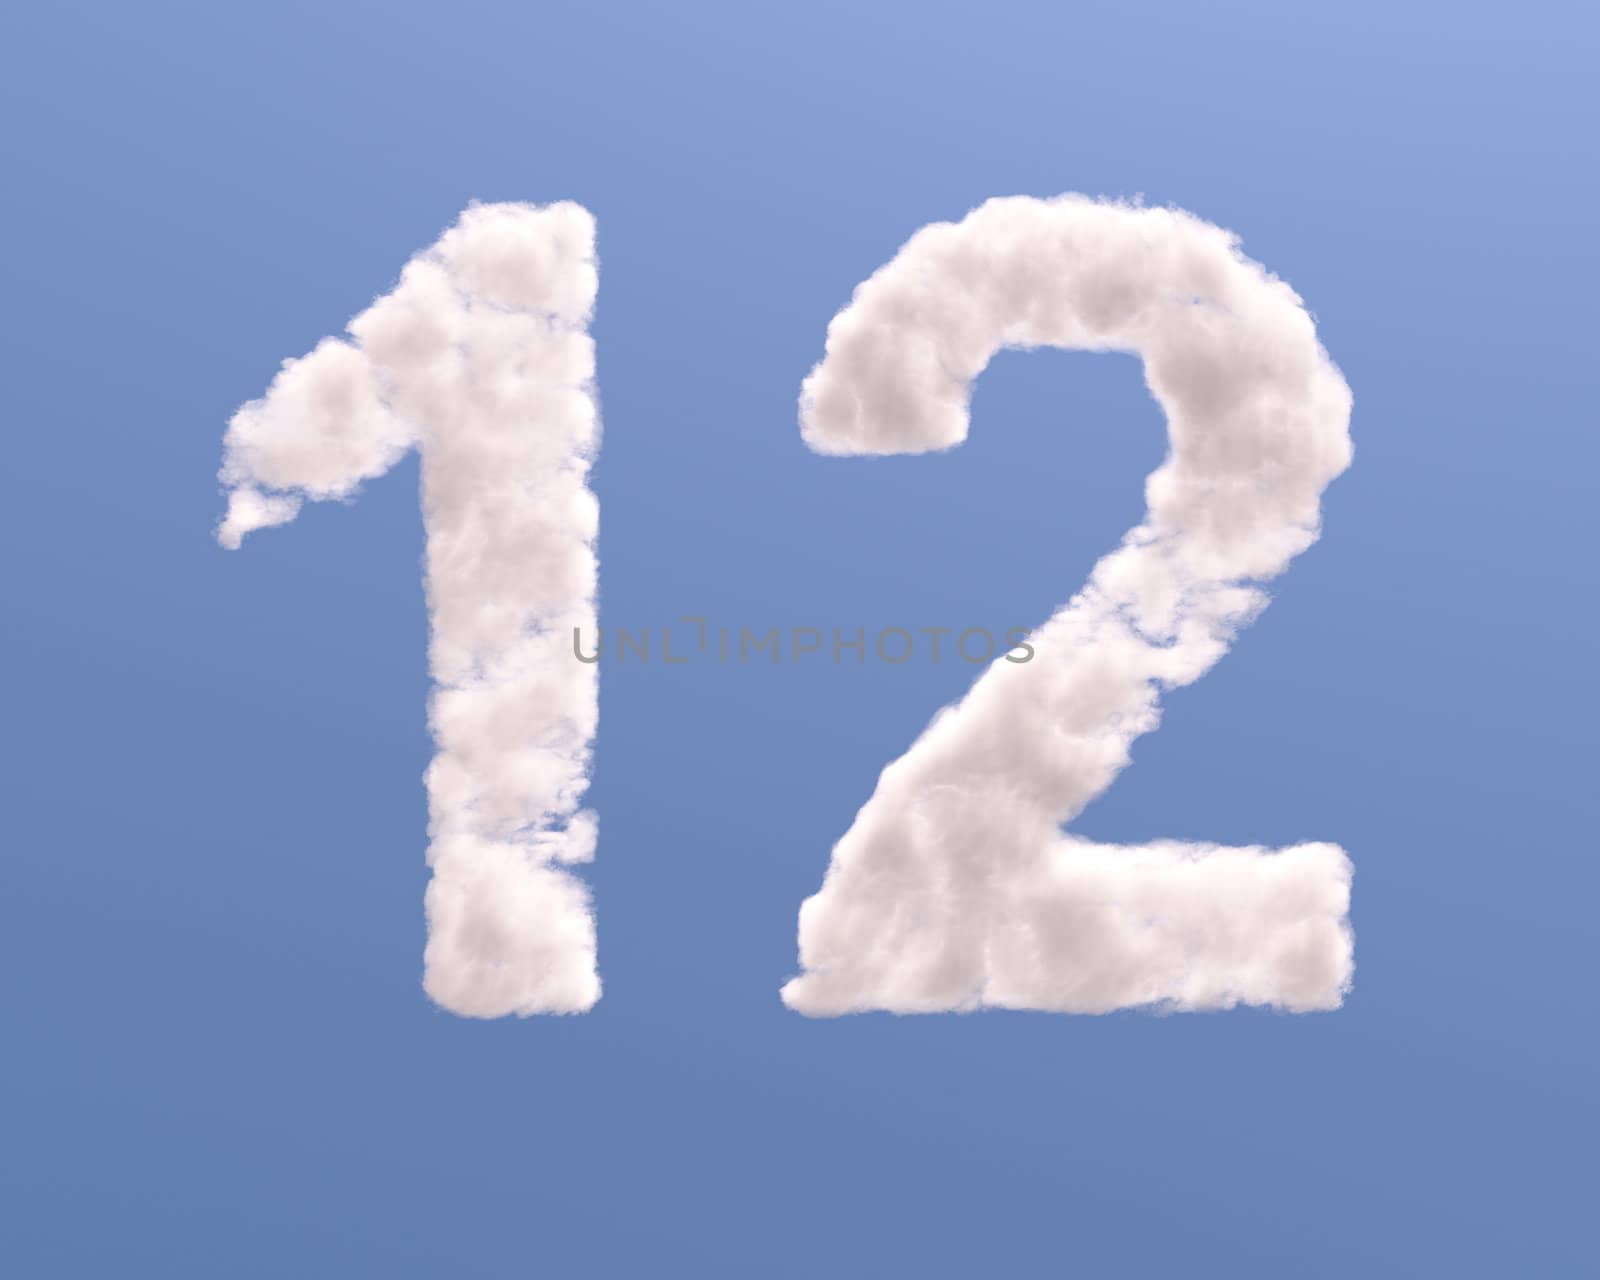 Number 1 and 2 cloud shape by Zelfit